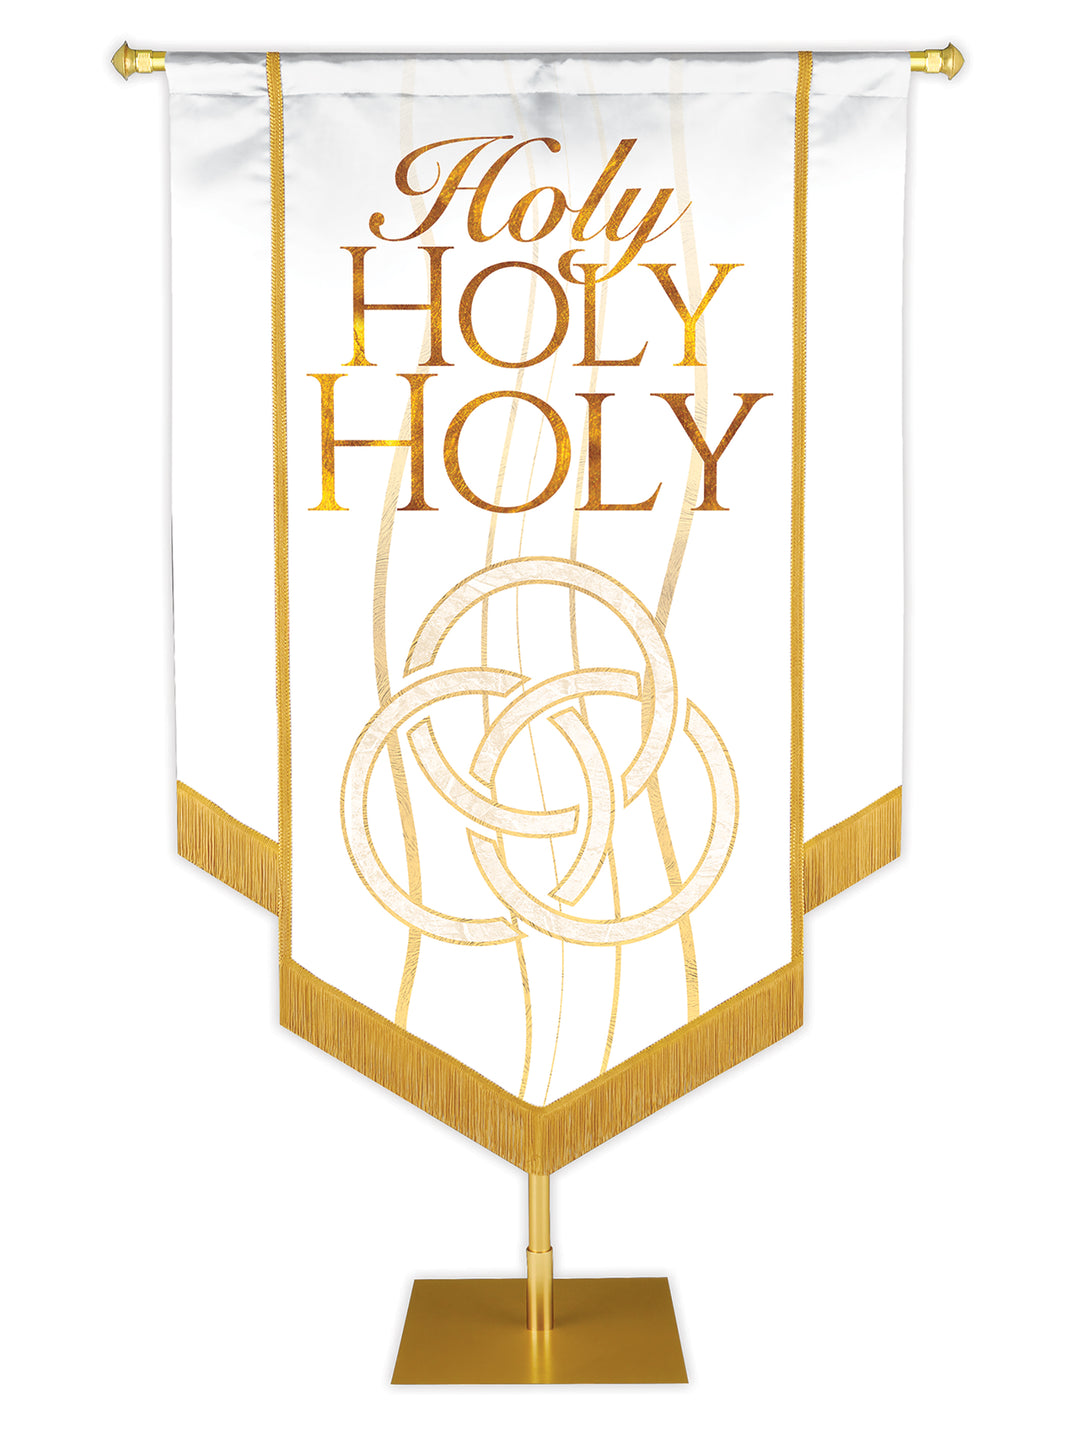 Experiencing God Trinity, Holy Holy Holy Embellished Banner - Handcrafted Banners - PraiseBanners